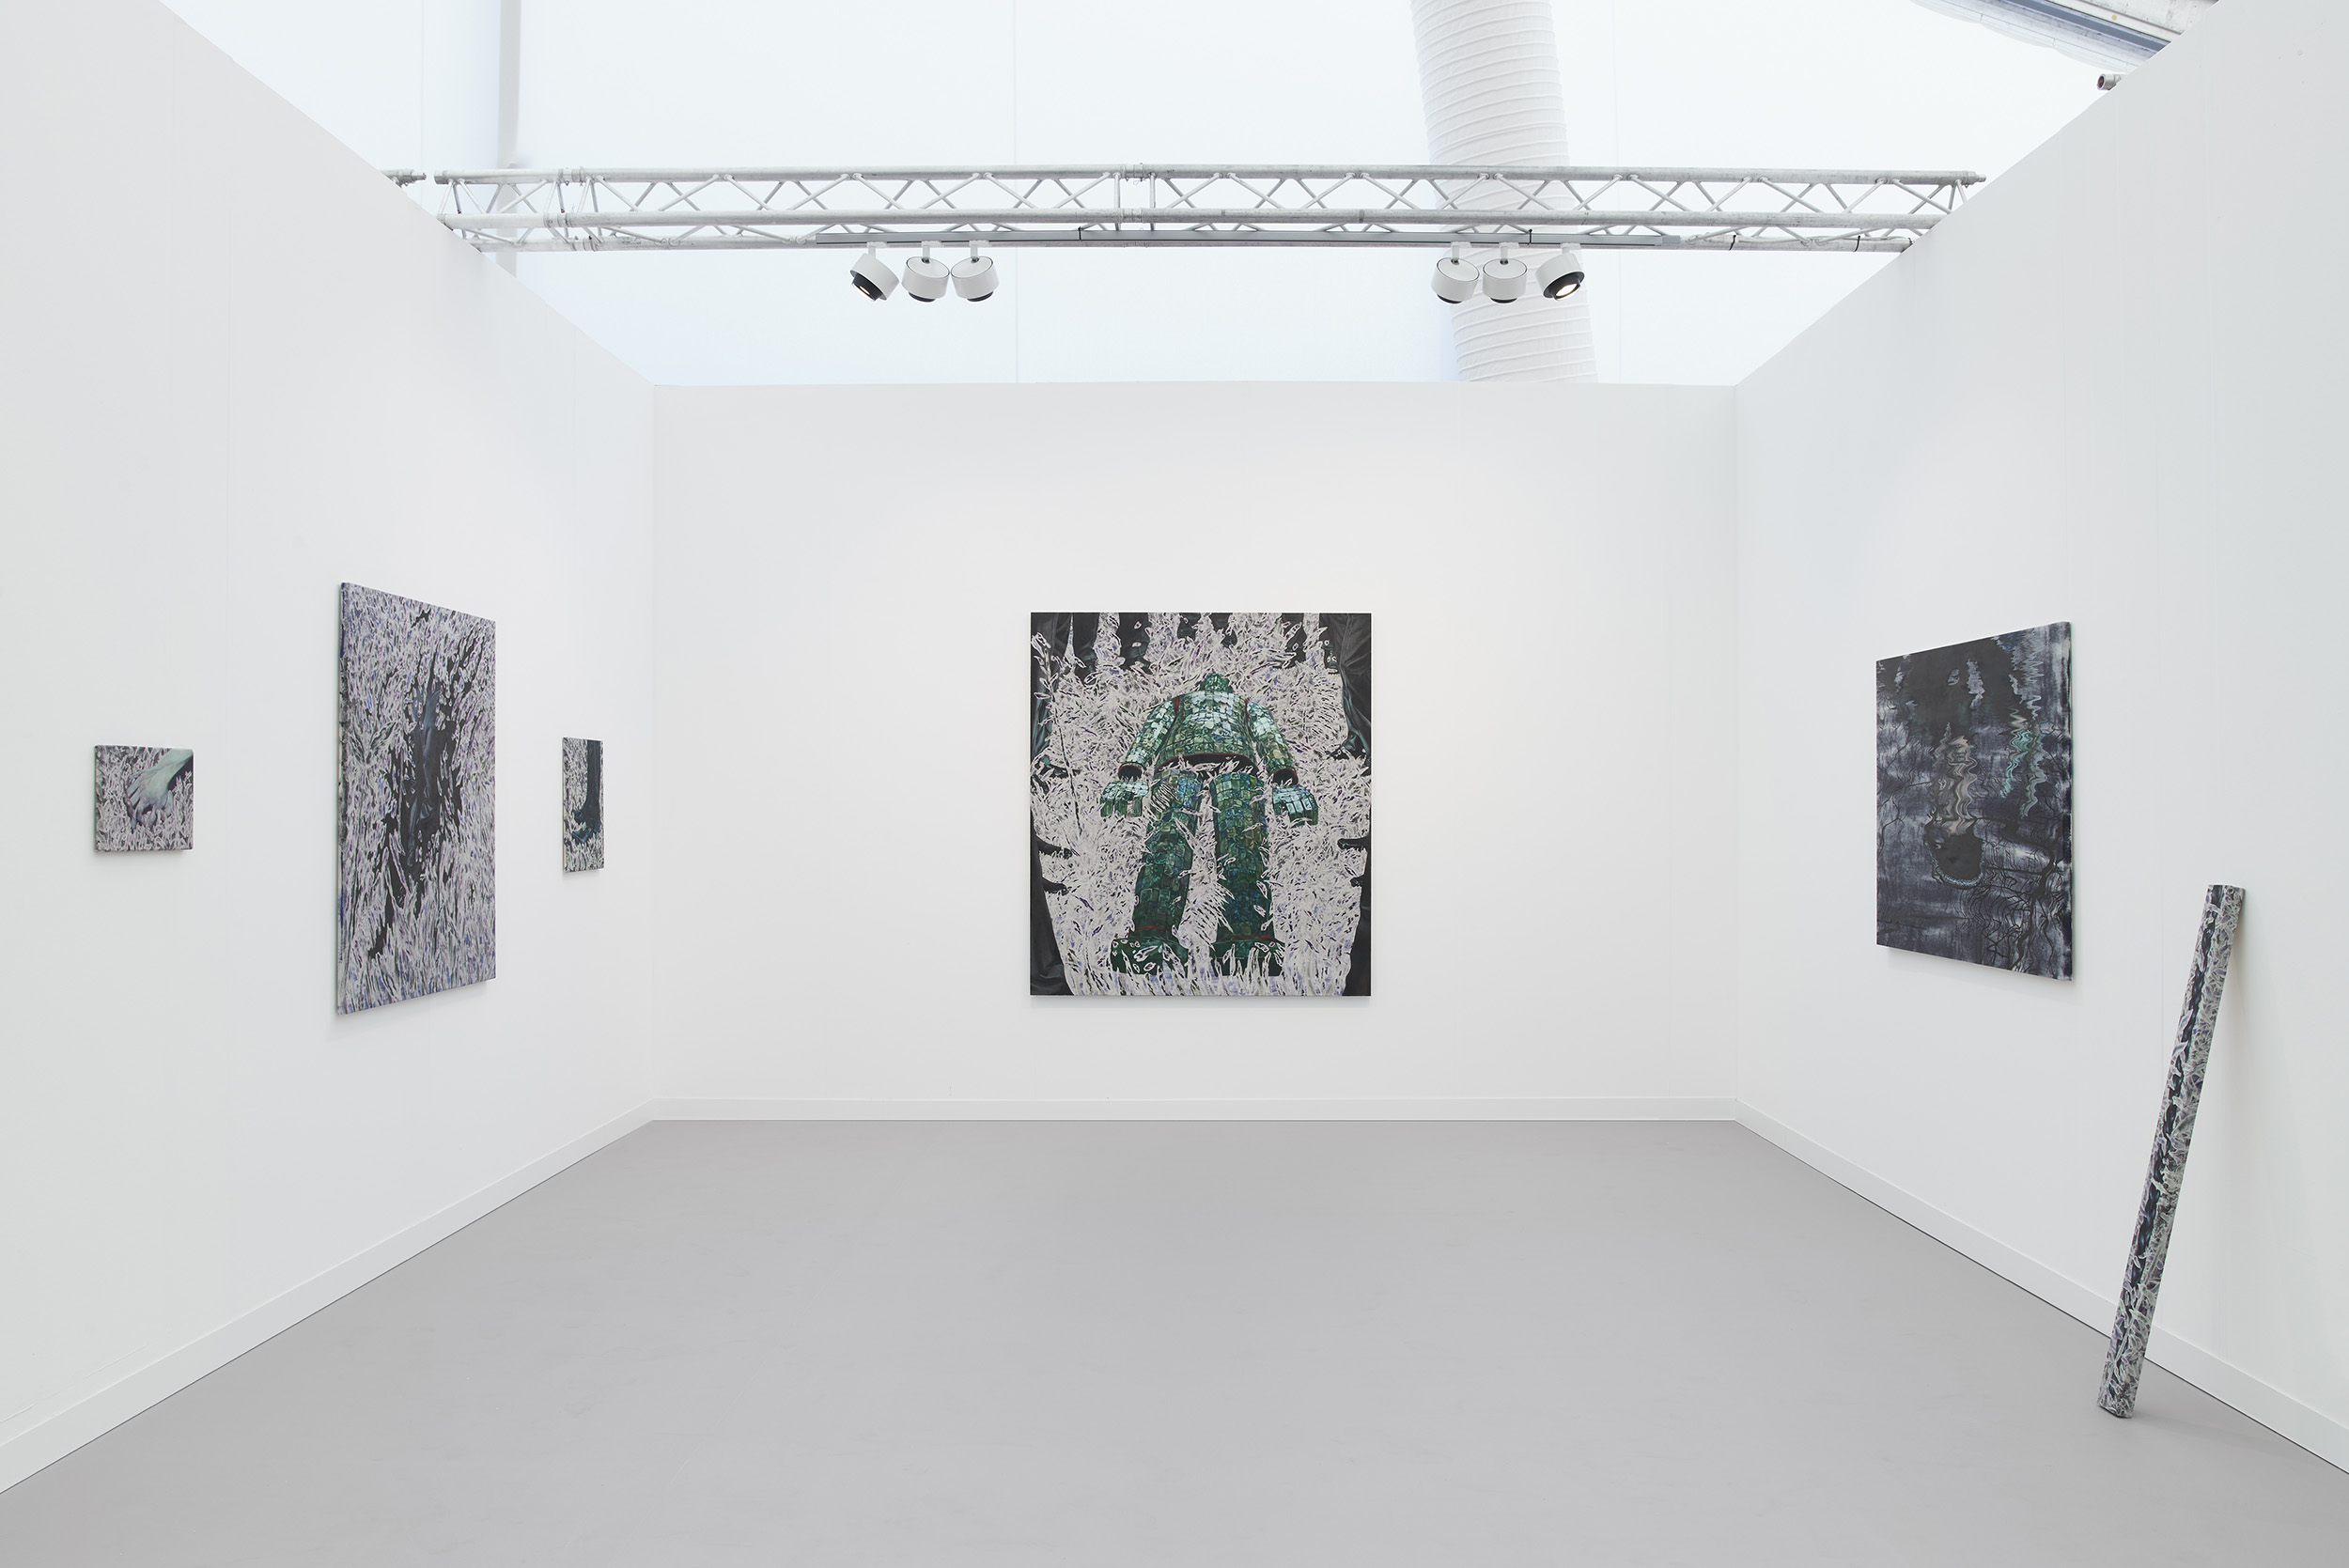 Michael solo presentation at Frieze London, Gallery Vacancy, 2022